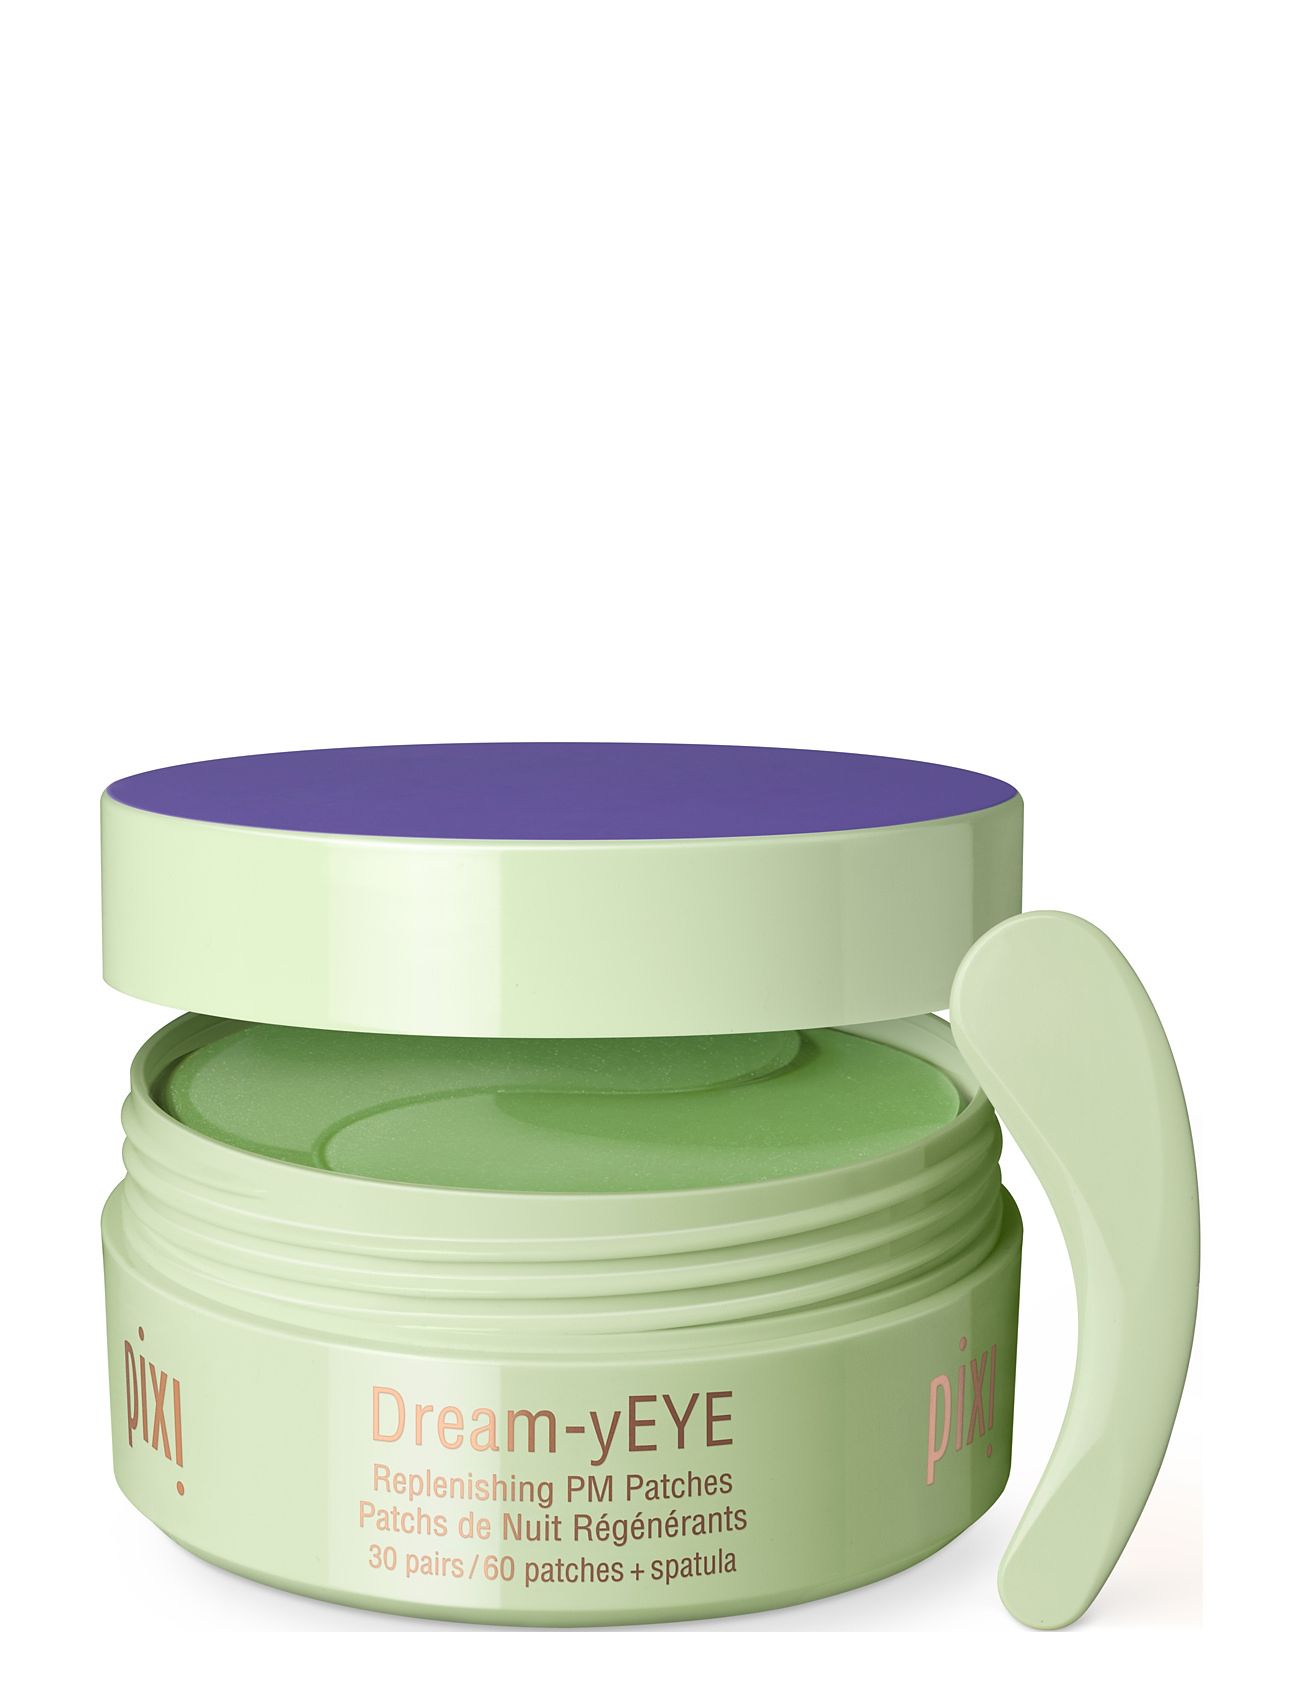 Dream-Y Eye Beauty Women Skin Care Face Eye Patches Nude Pixi